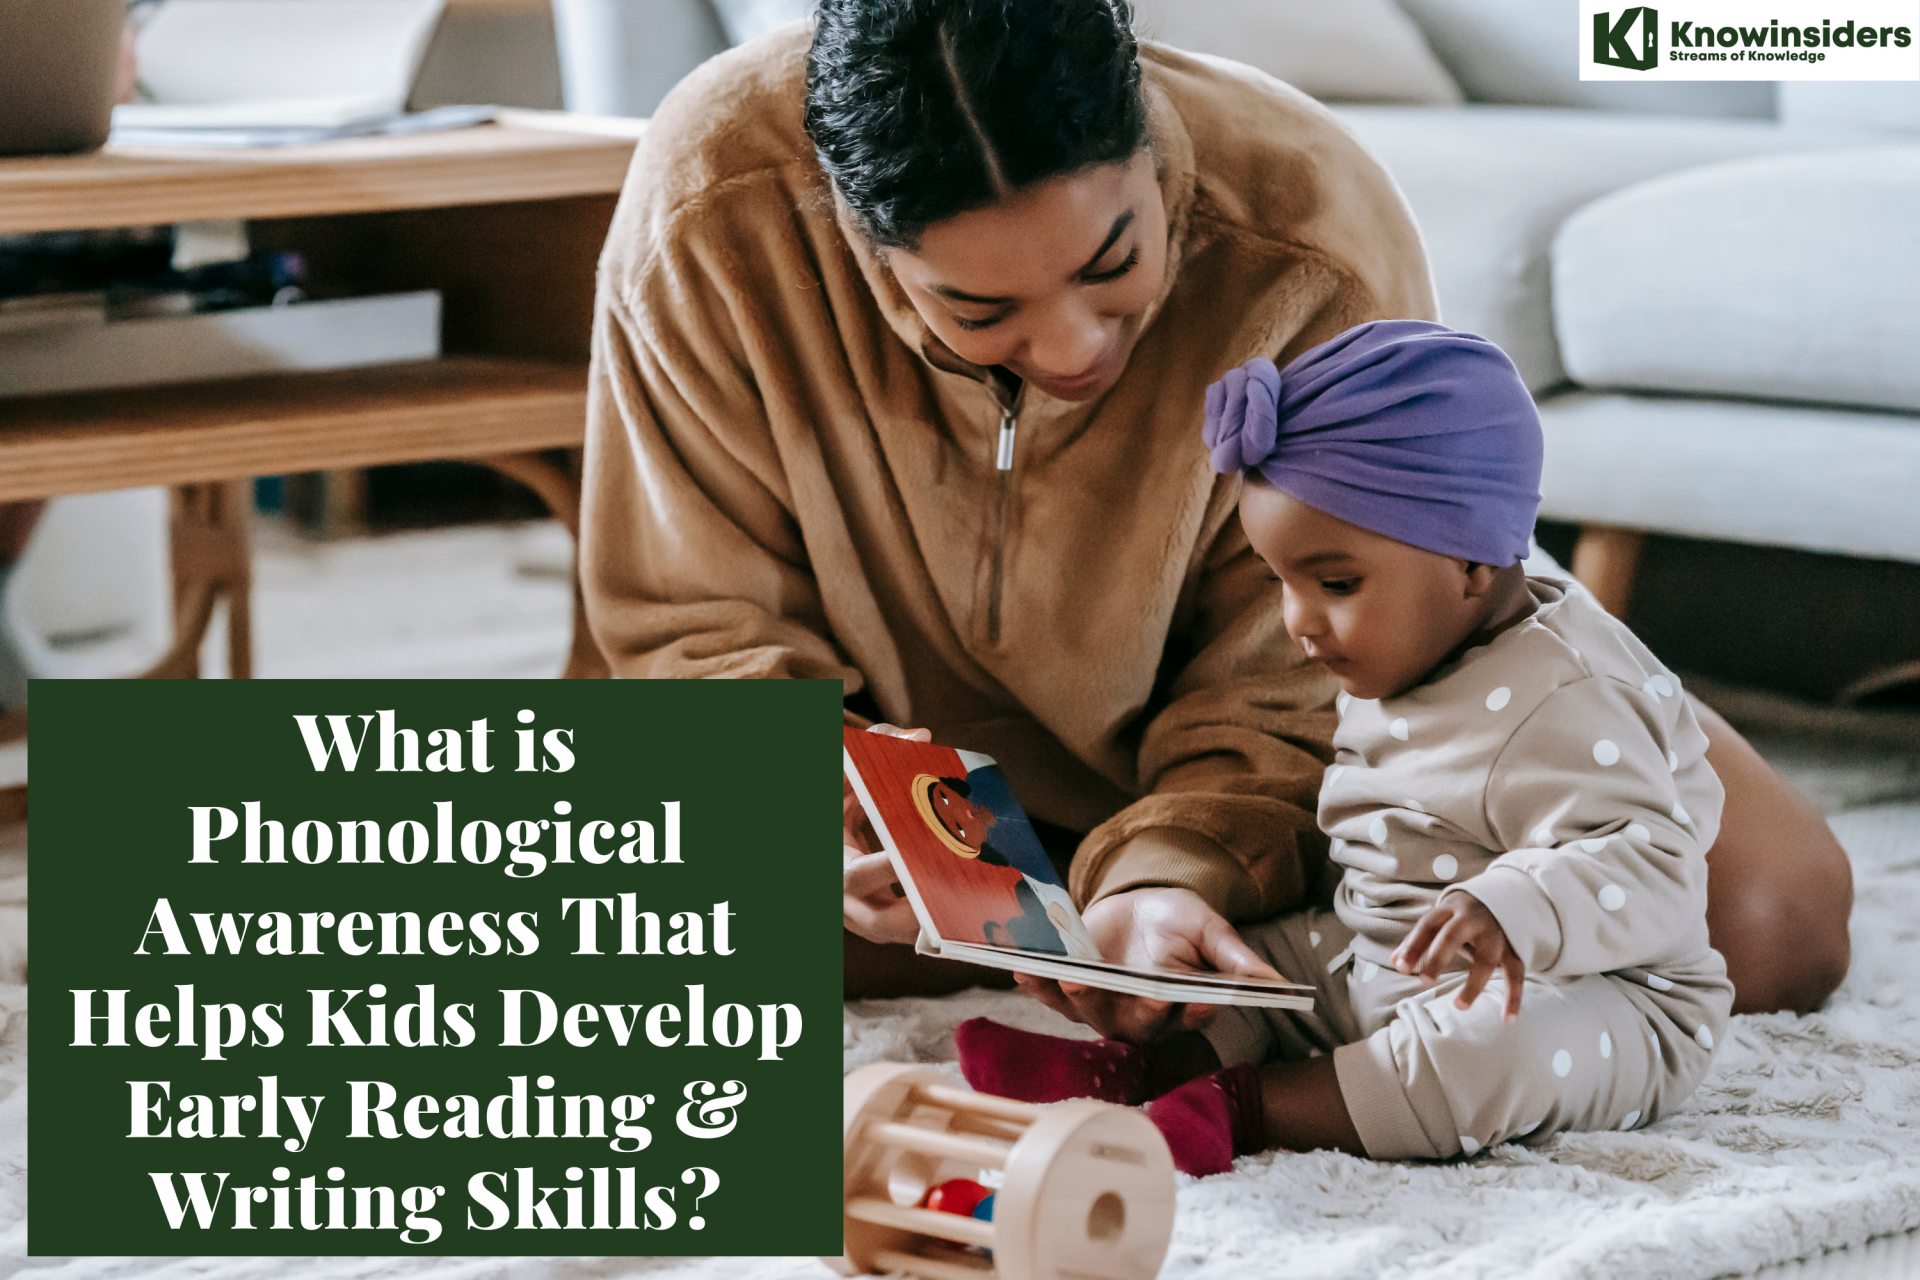 What is Phonological Awareness That Helps Kids Develop Early Reading & Writing Skills?